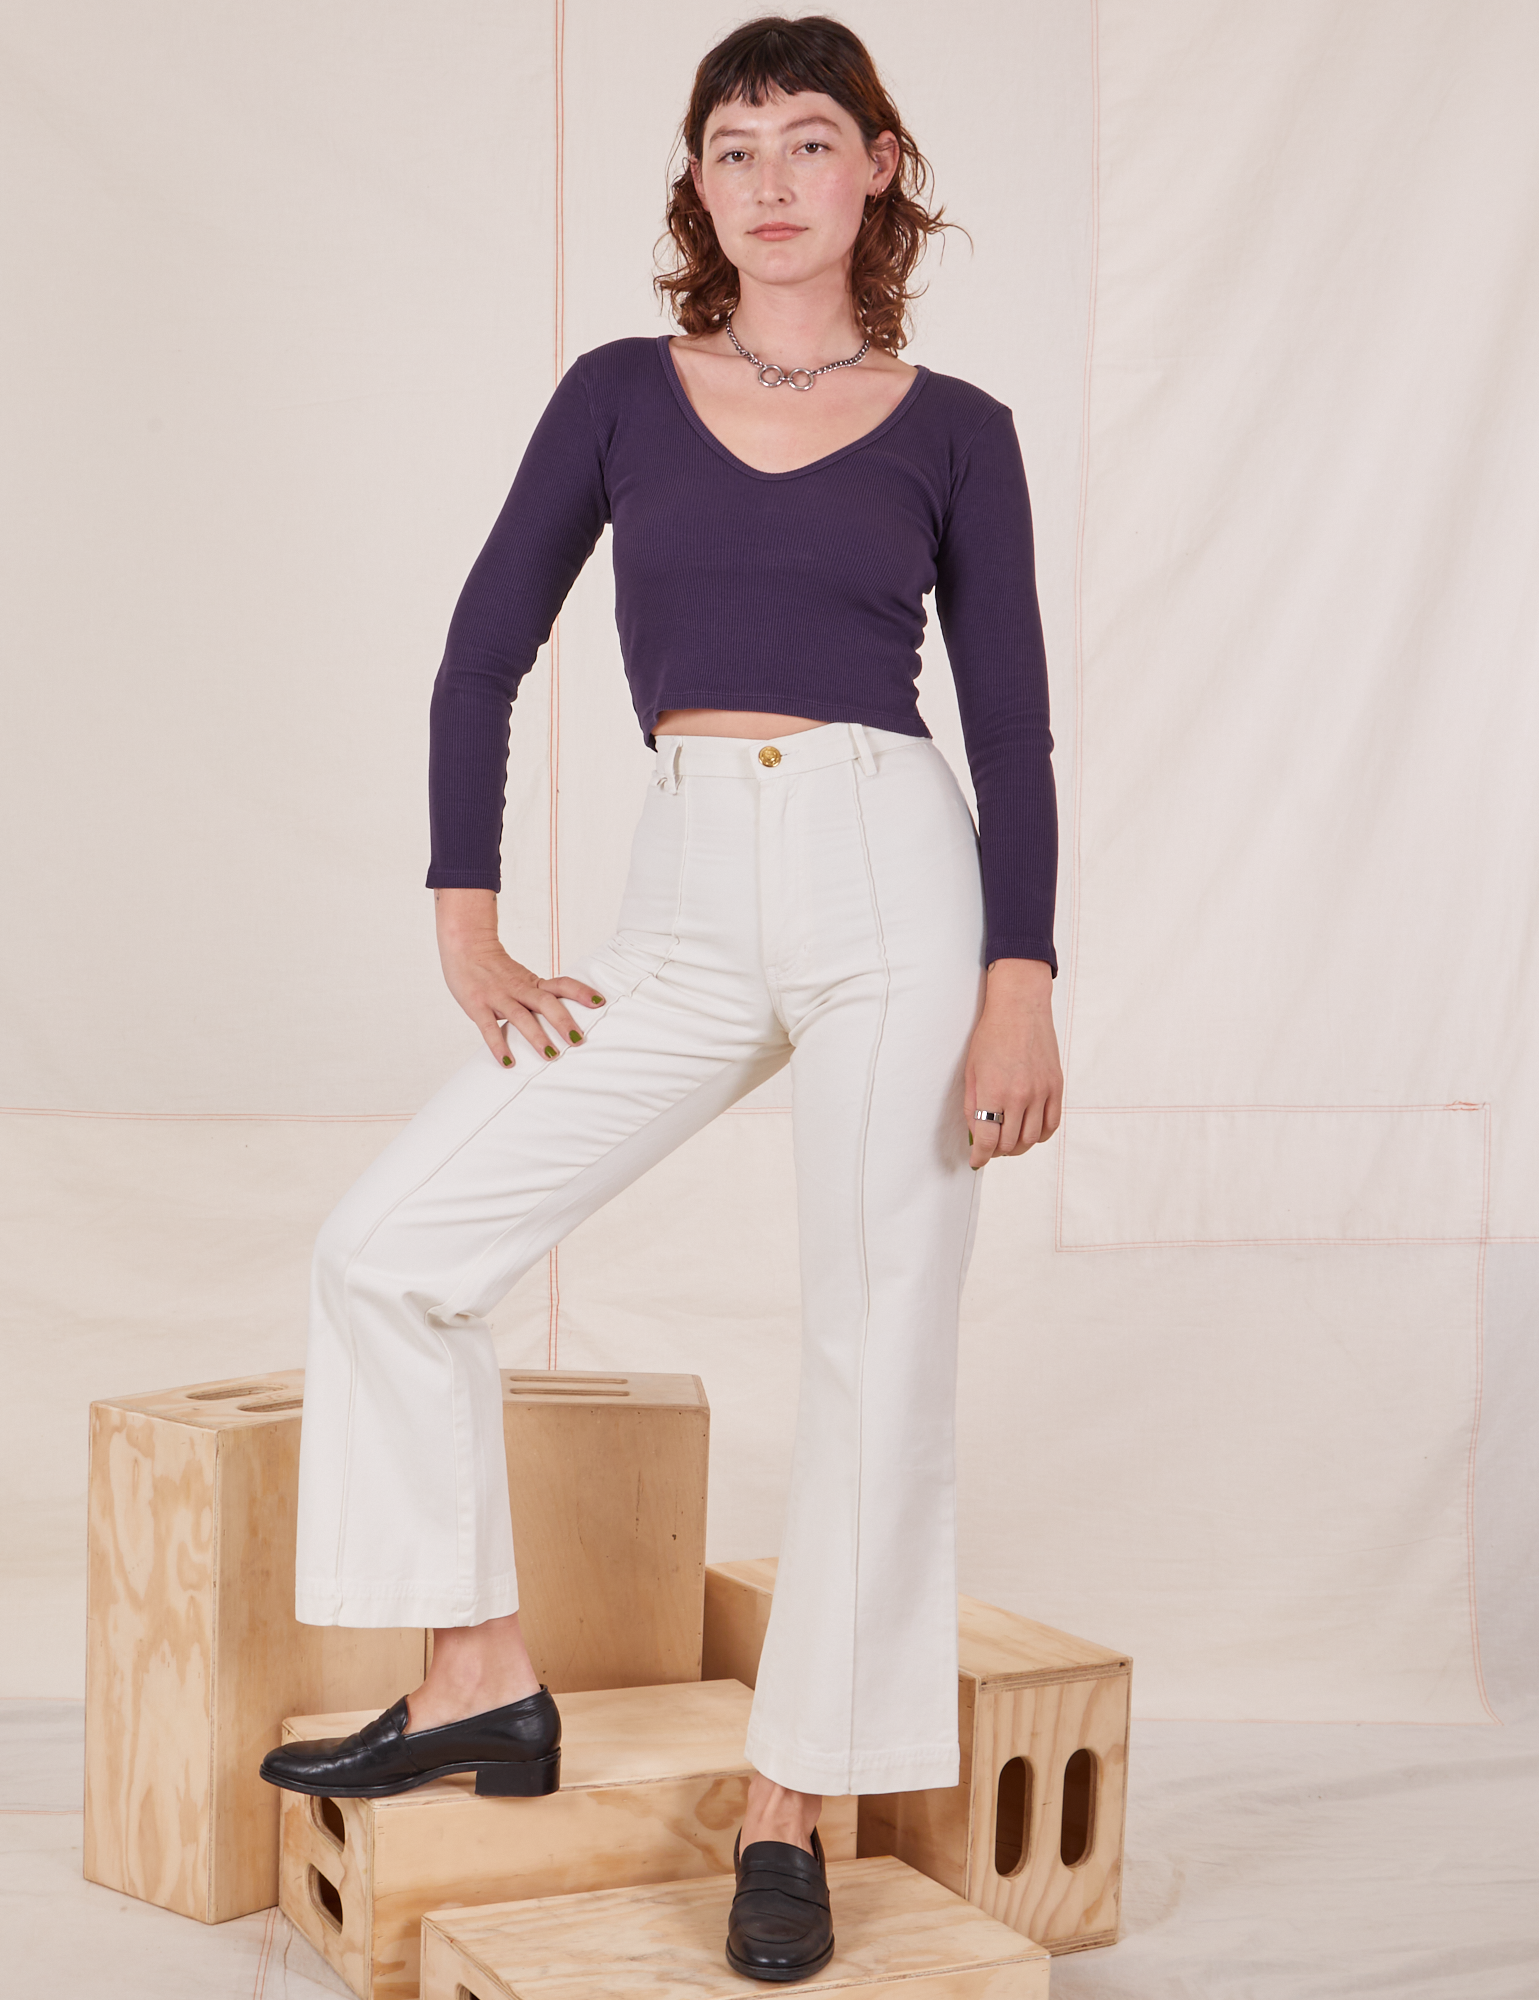 Alex is wearing Long Sleeve V-Neck Tee in Nebula Purple and vintage off-white Western Pants